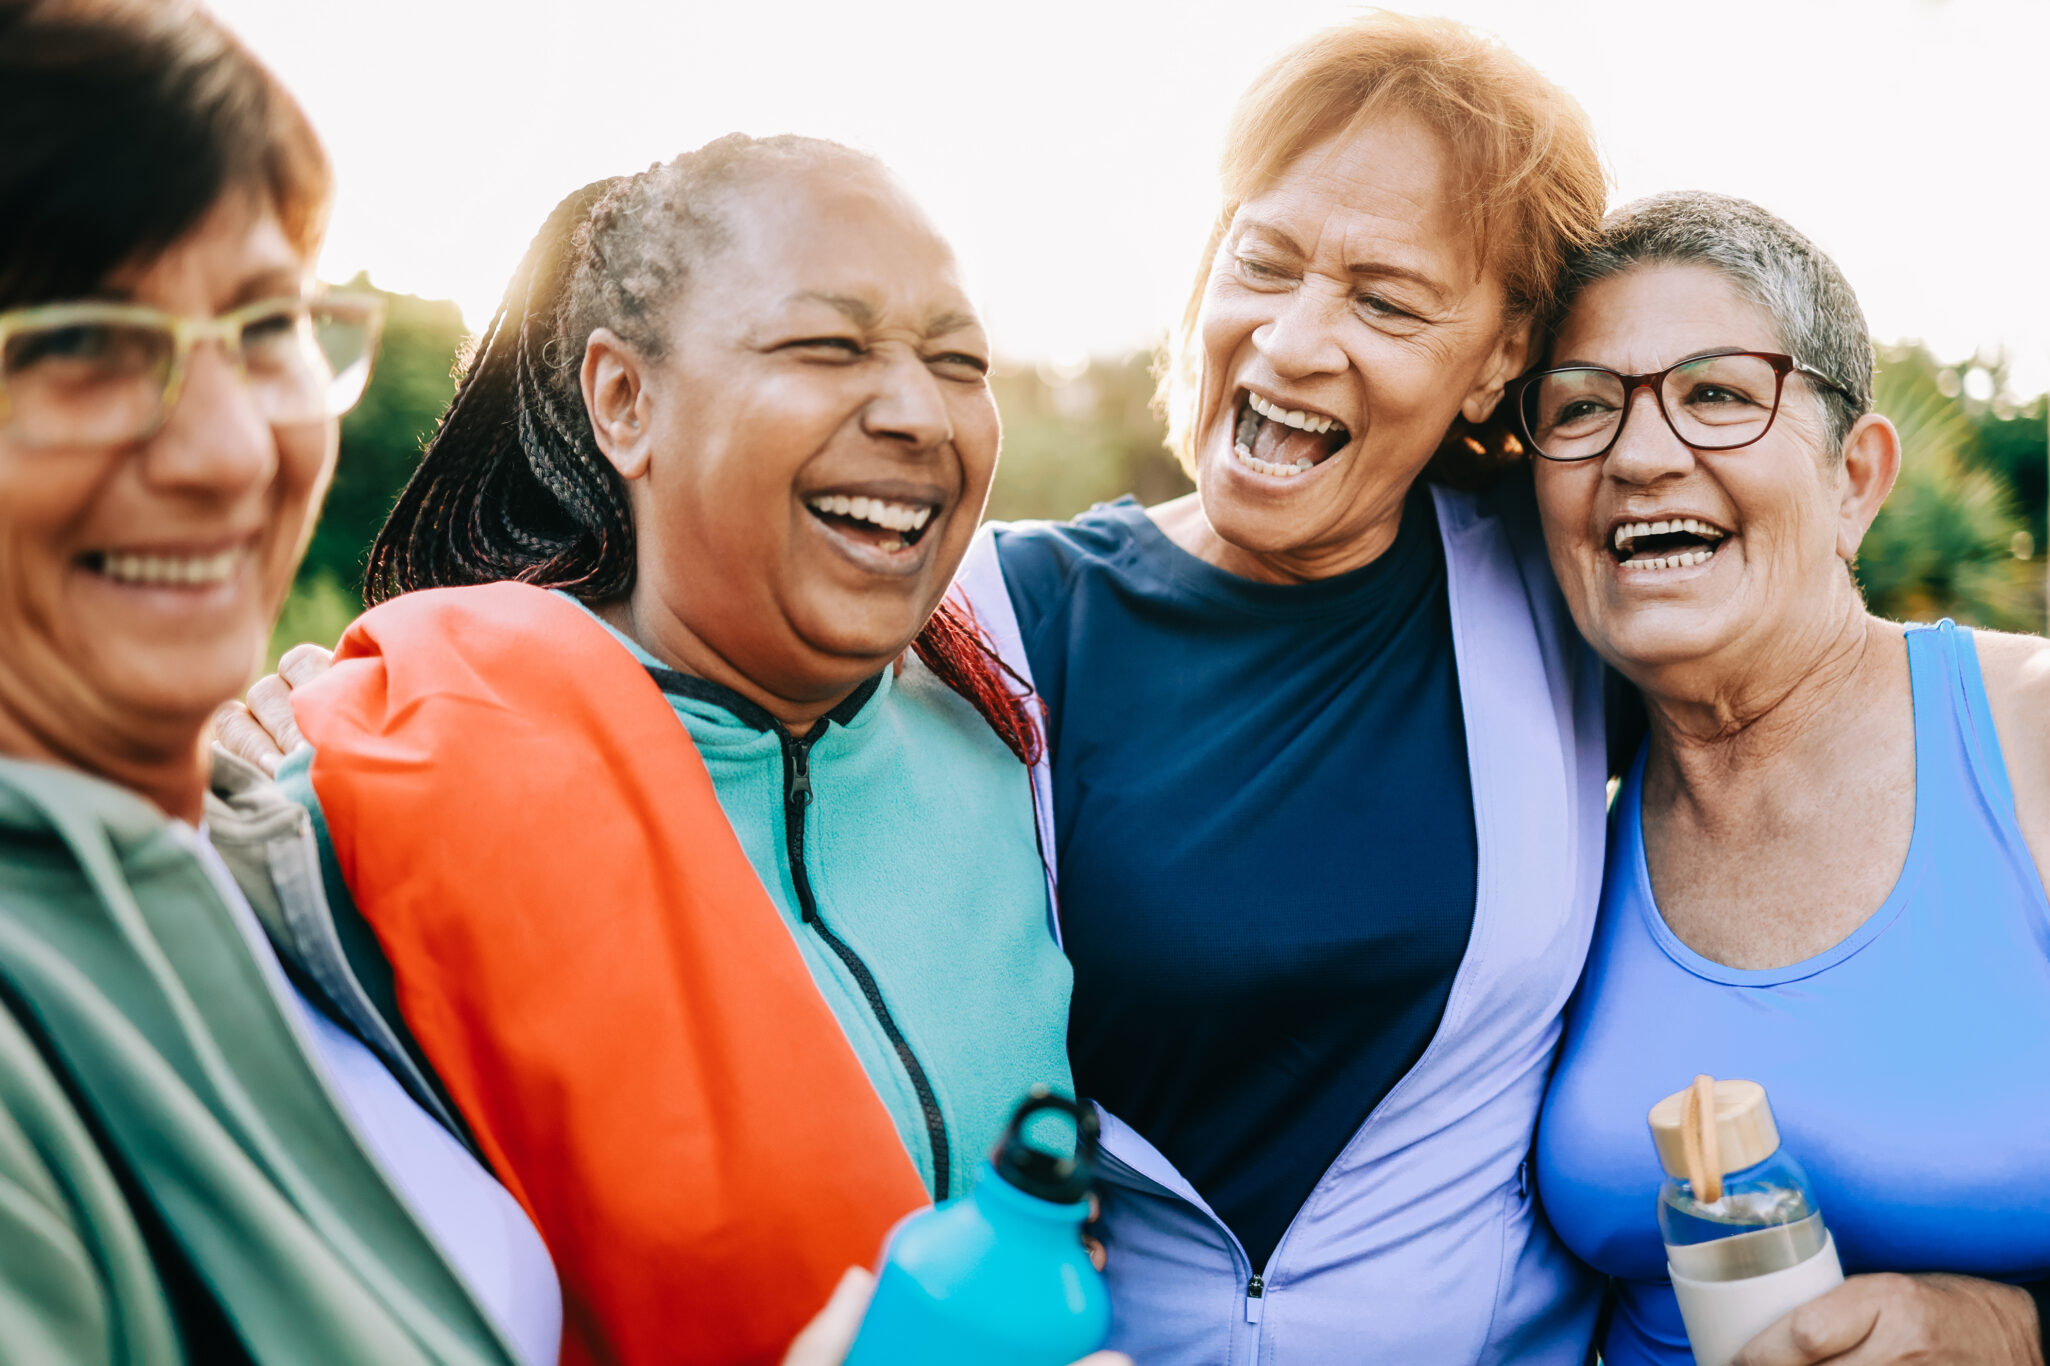 A group of senuior woman laughing and hugging after an outdoor workout